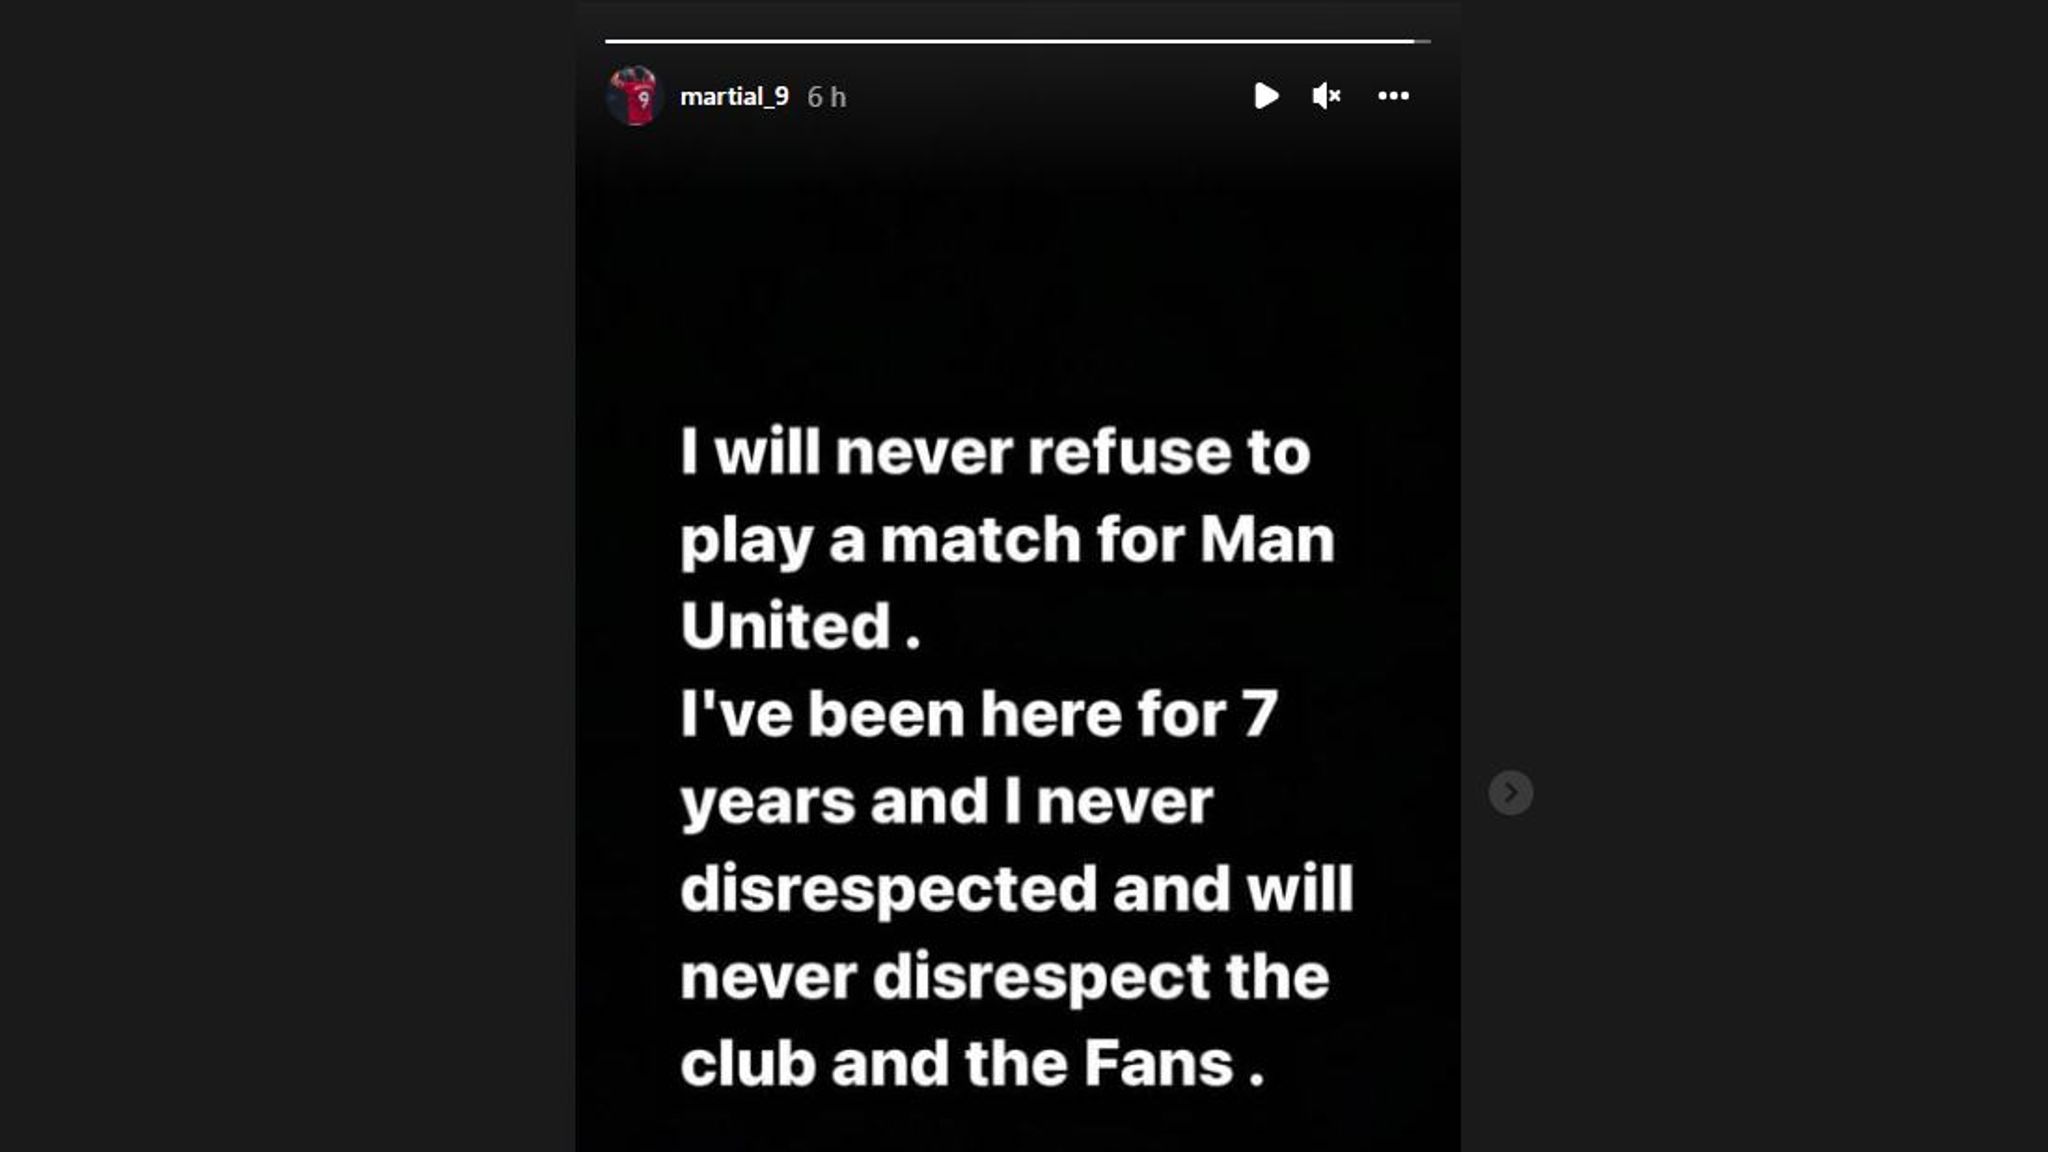 Anthony Martial denied Rangnick&#39;s claim on Instagram (credit: martial_9)